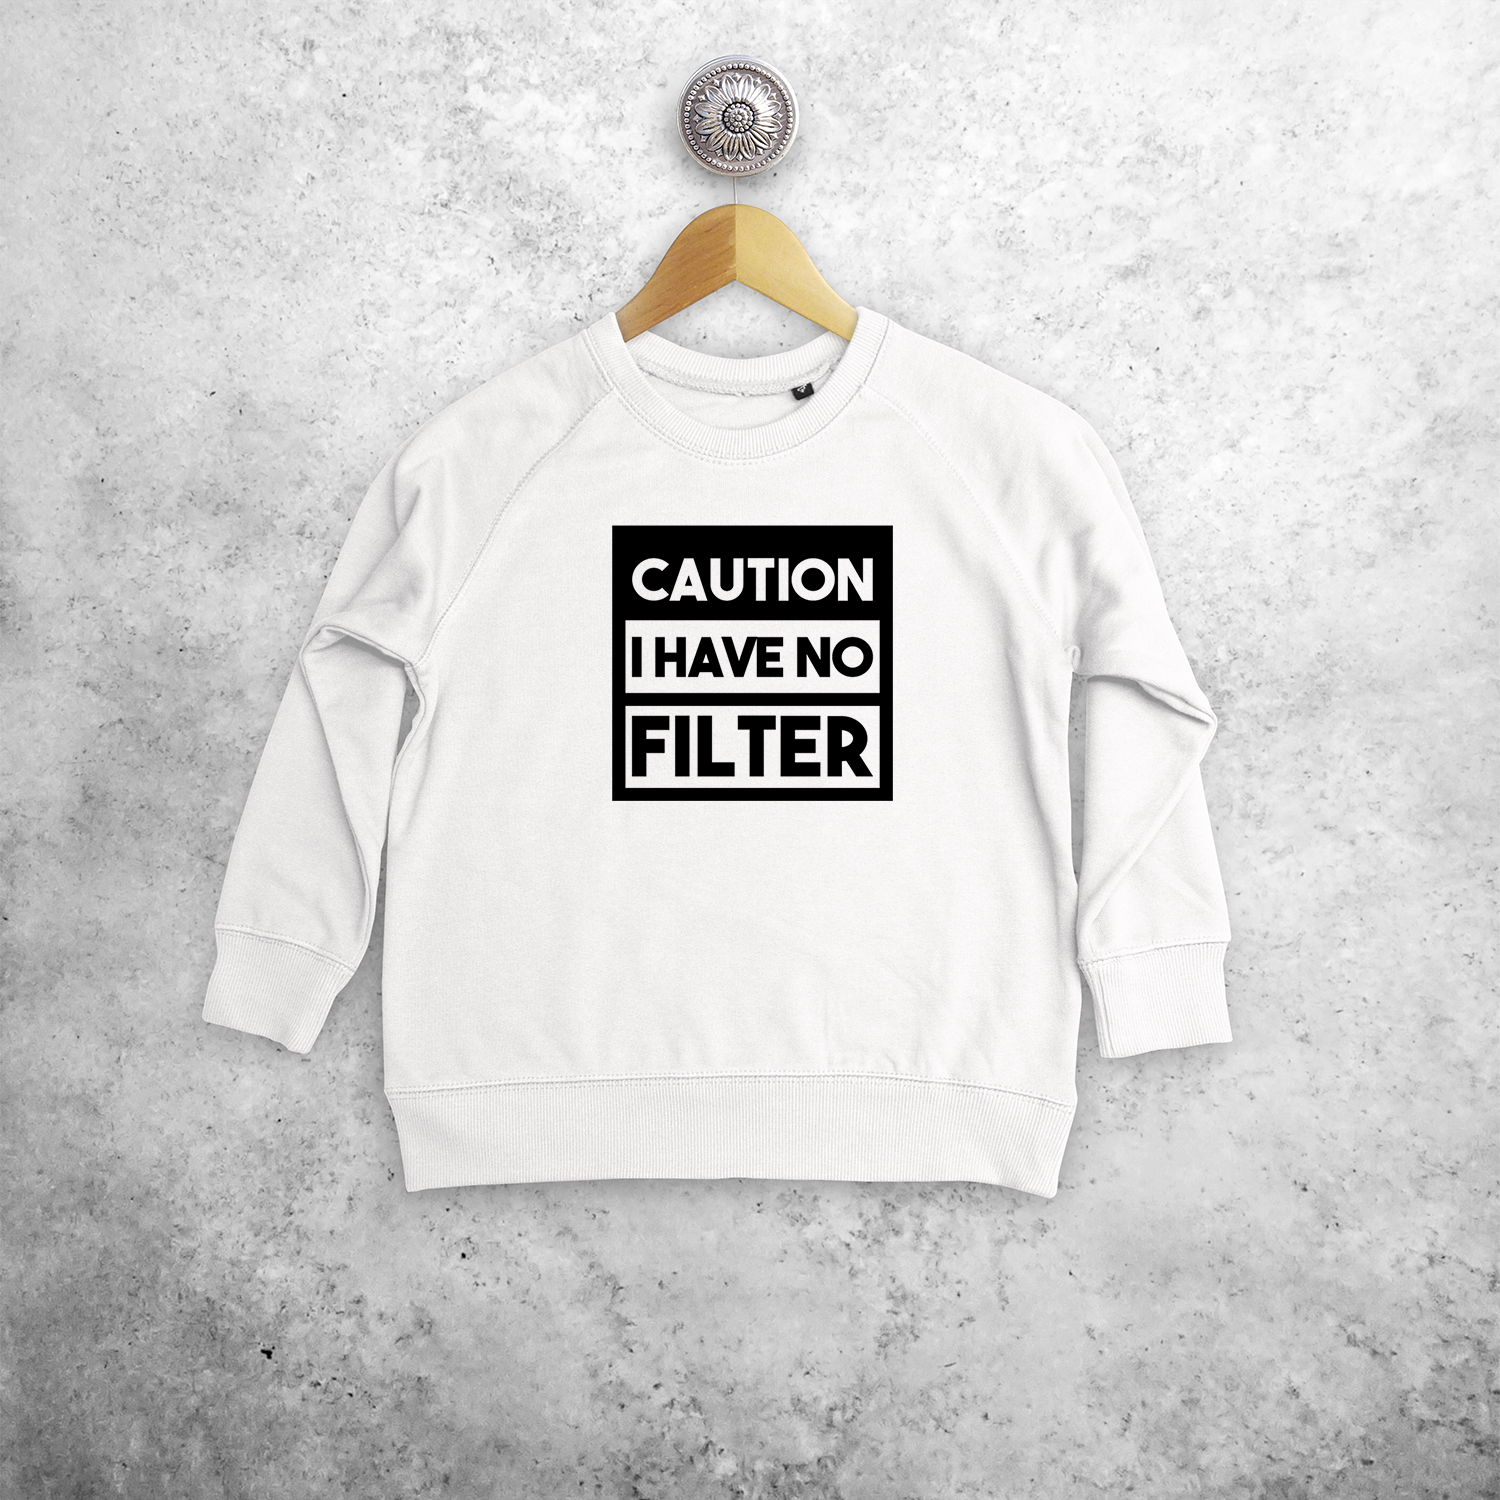 'Caution: I have no filter' kids sweater